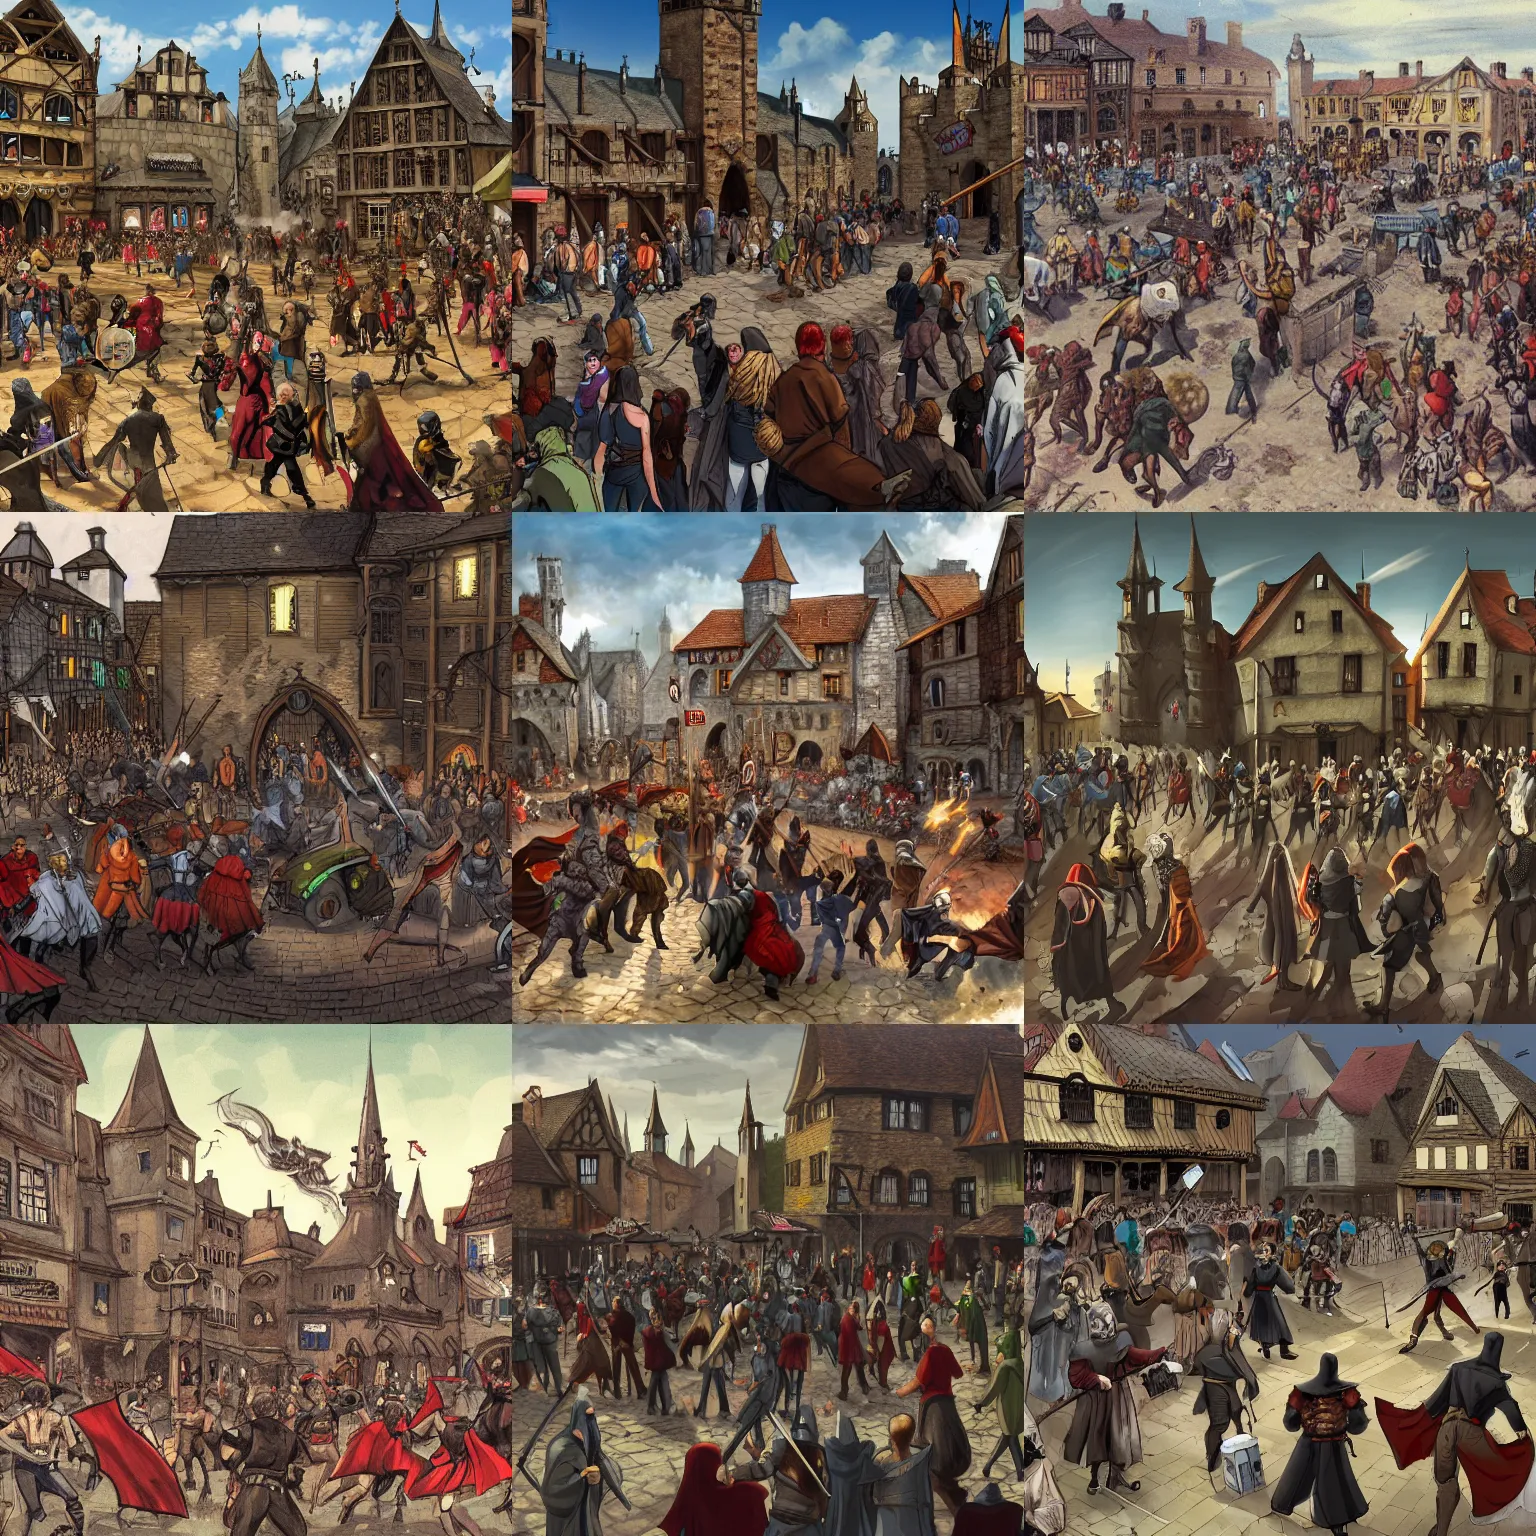 Prompt: vigilantes disrupting a crowded event, concept art, medieval town square, large crowds, medieval fantasy, stone buildings